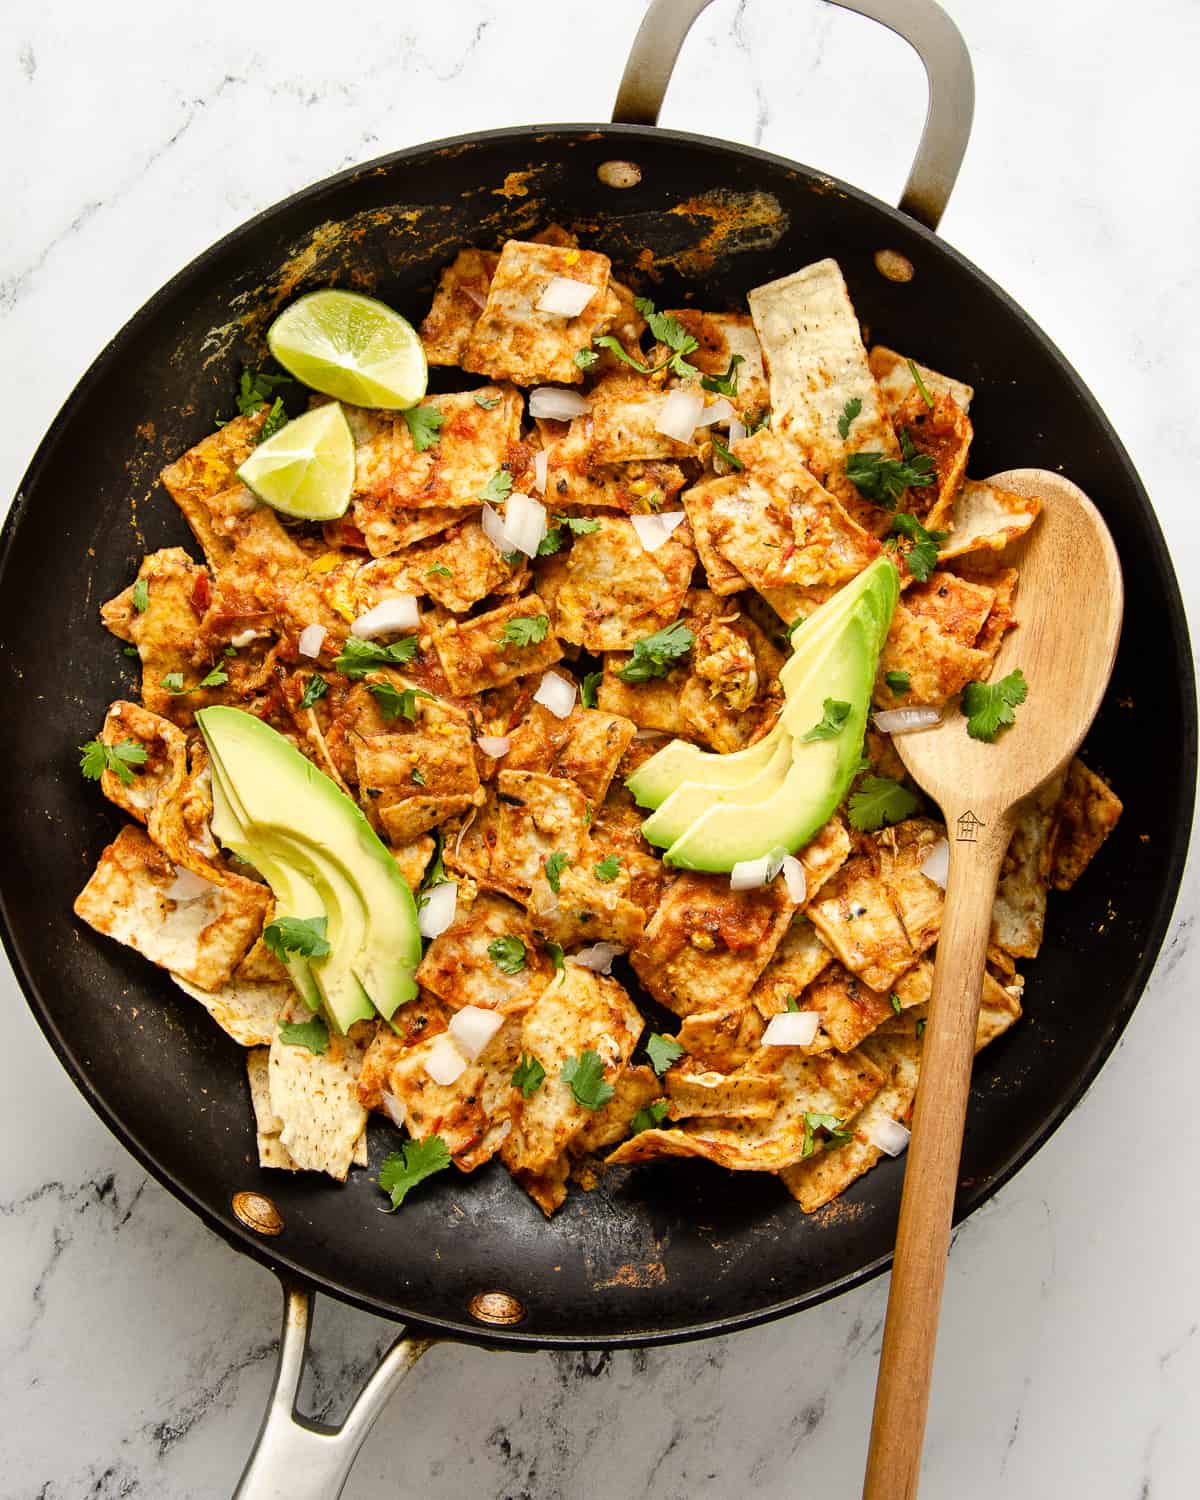 A skillet in view with finished chilaquiles topped with avocado slices, diced onion and cilantro.